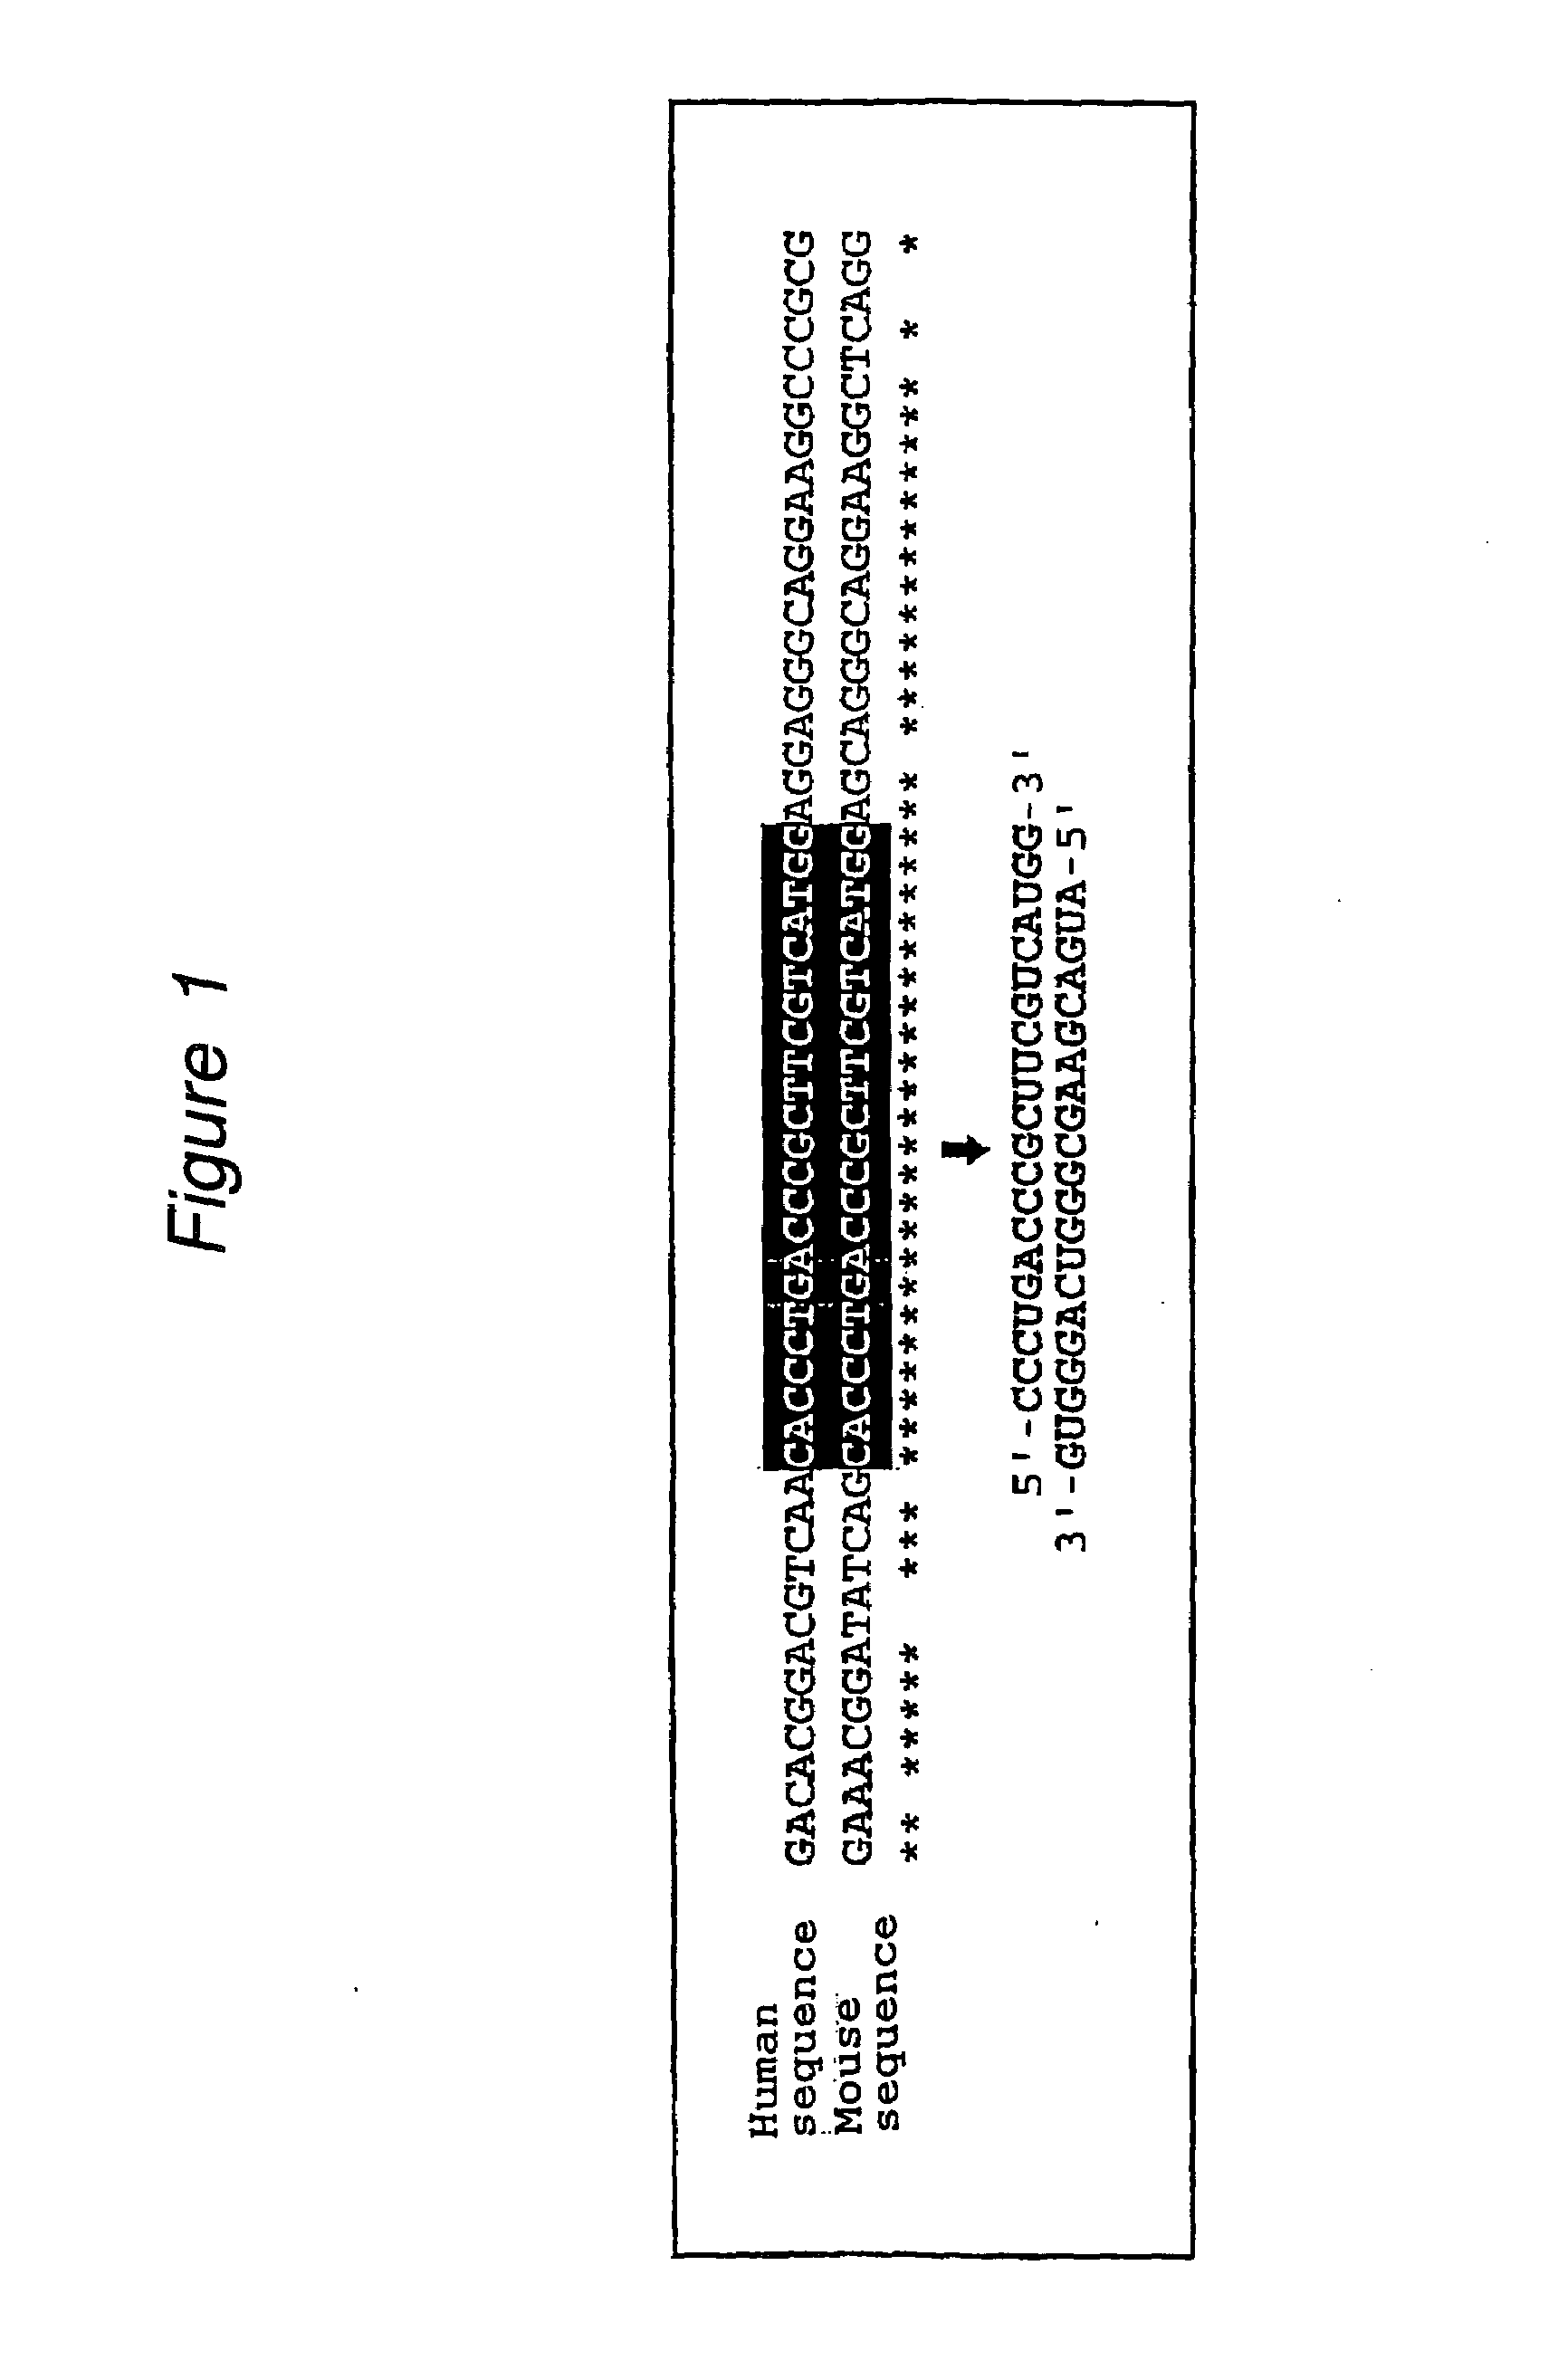 Polynucleotides for causing RNA interference and method for inhibiting gene expression using the same